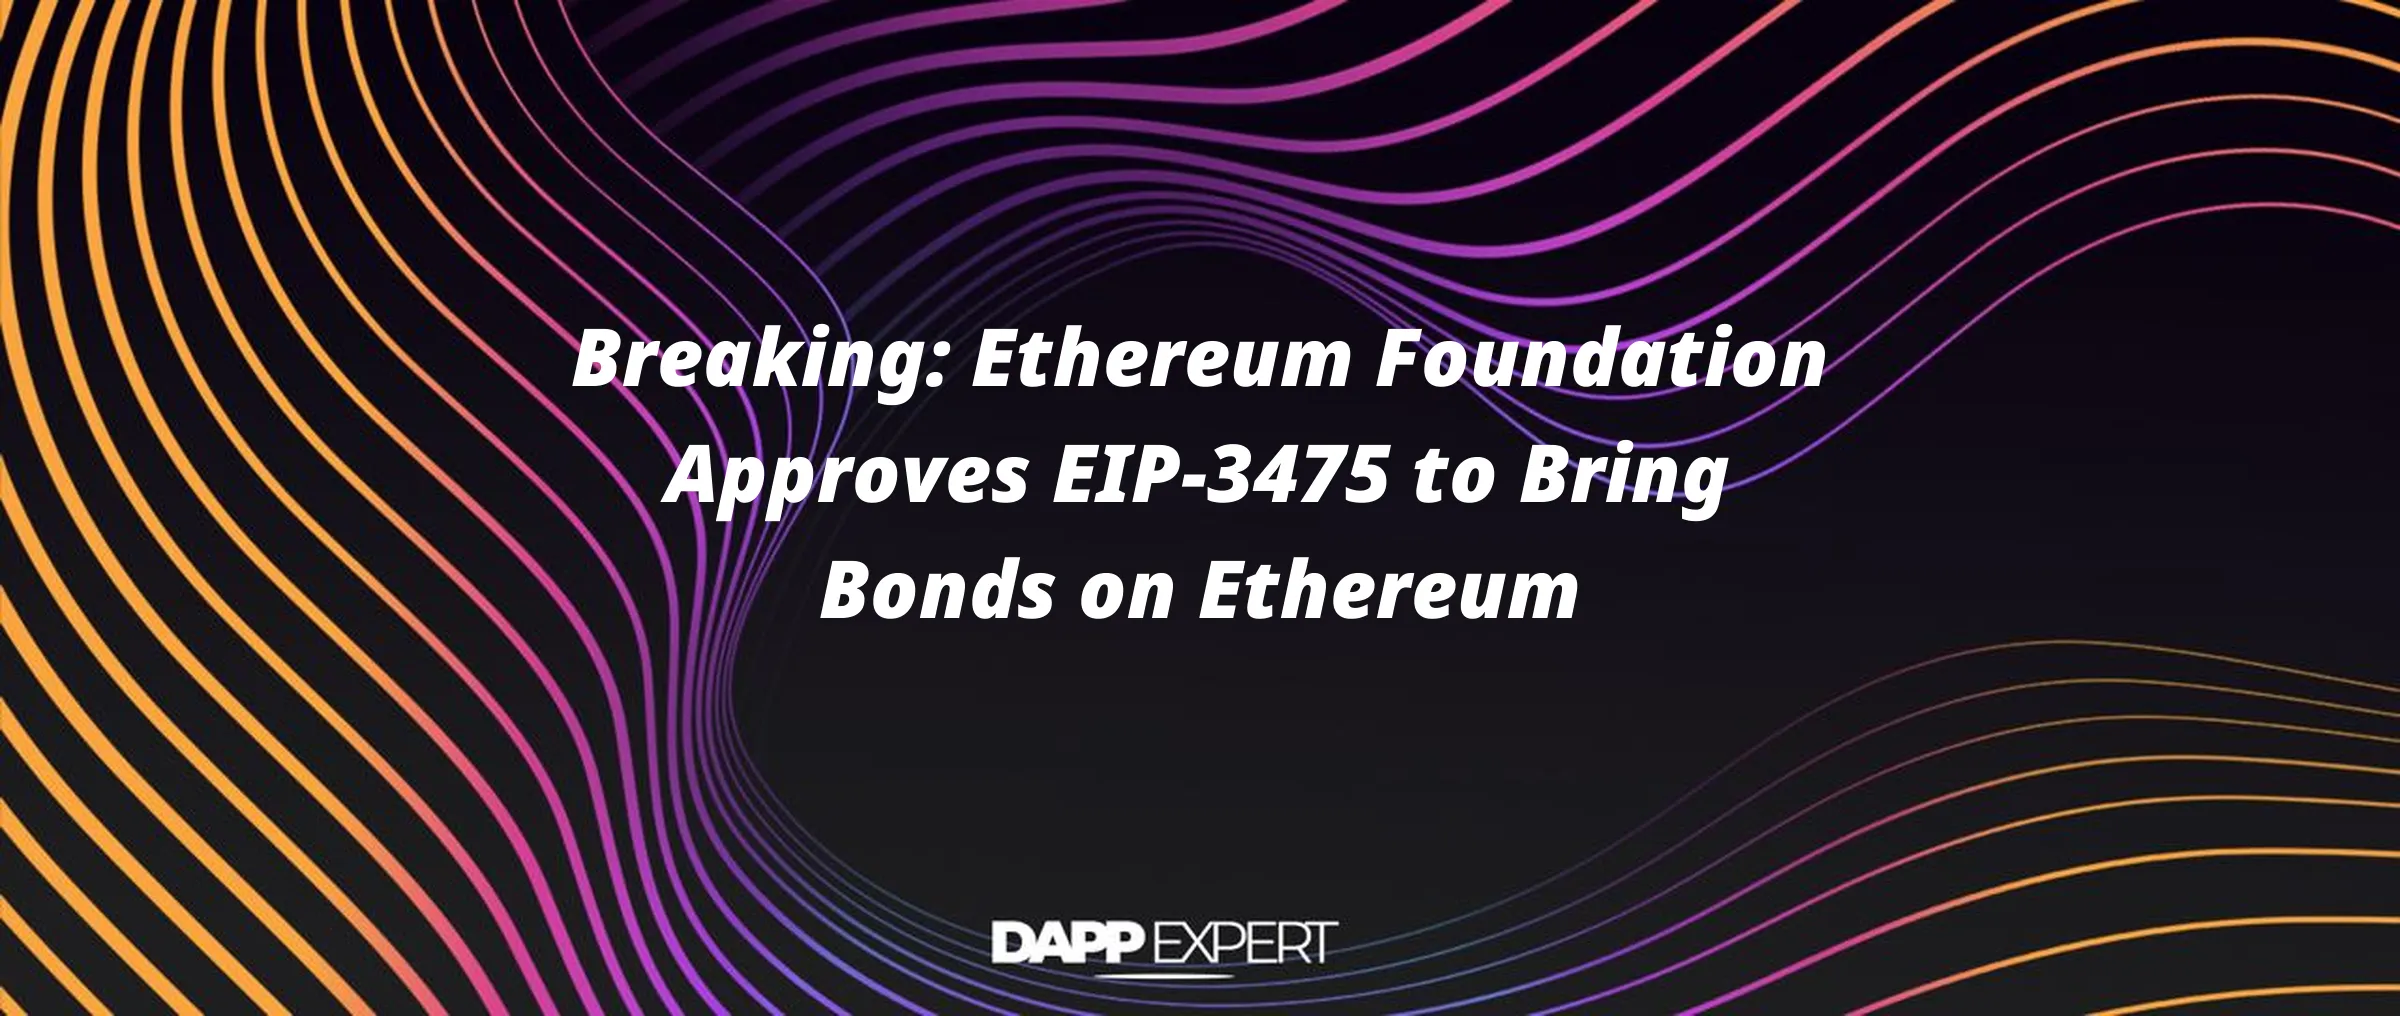 Breaking: Ethereum Foundation Approves EIP-3475 to Bring Bonds on Ethereum